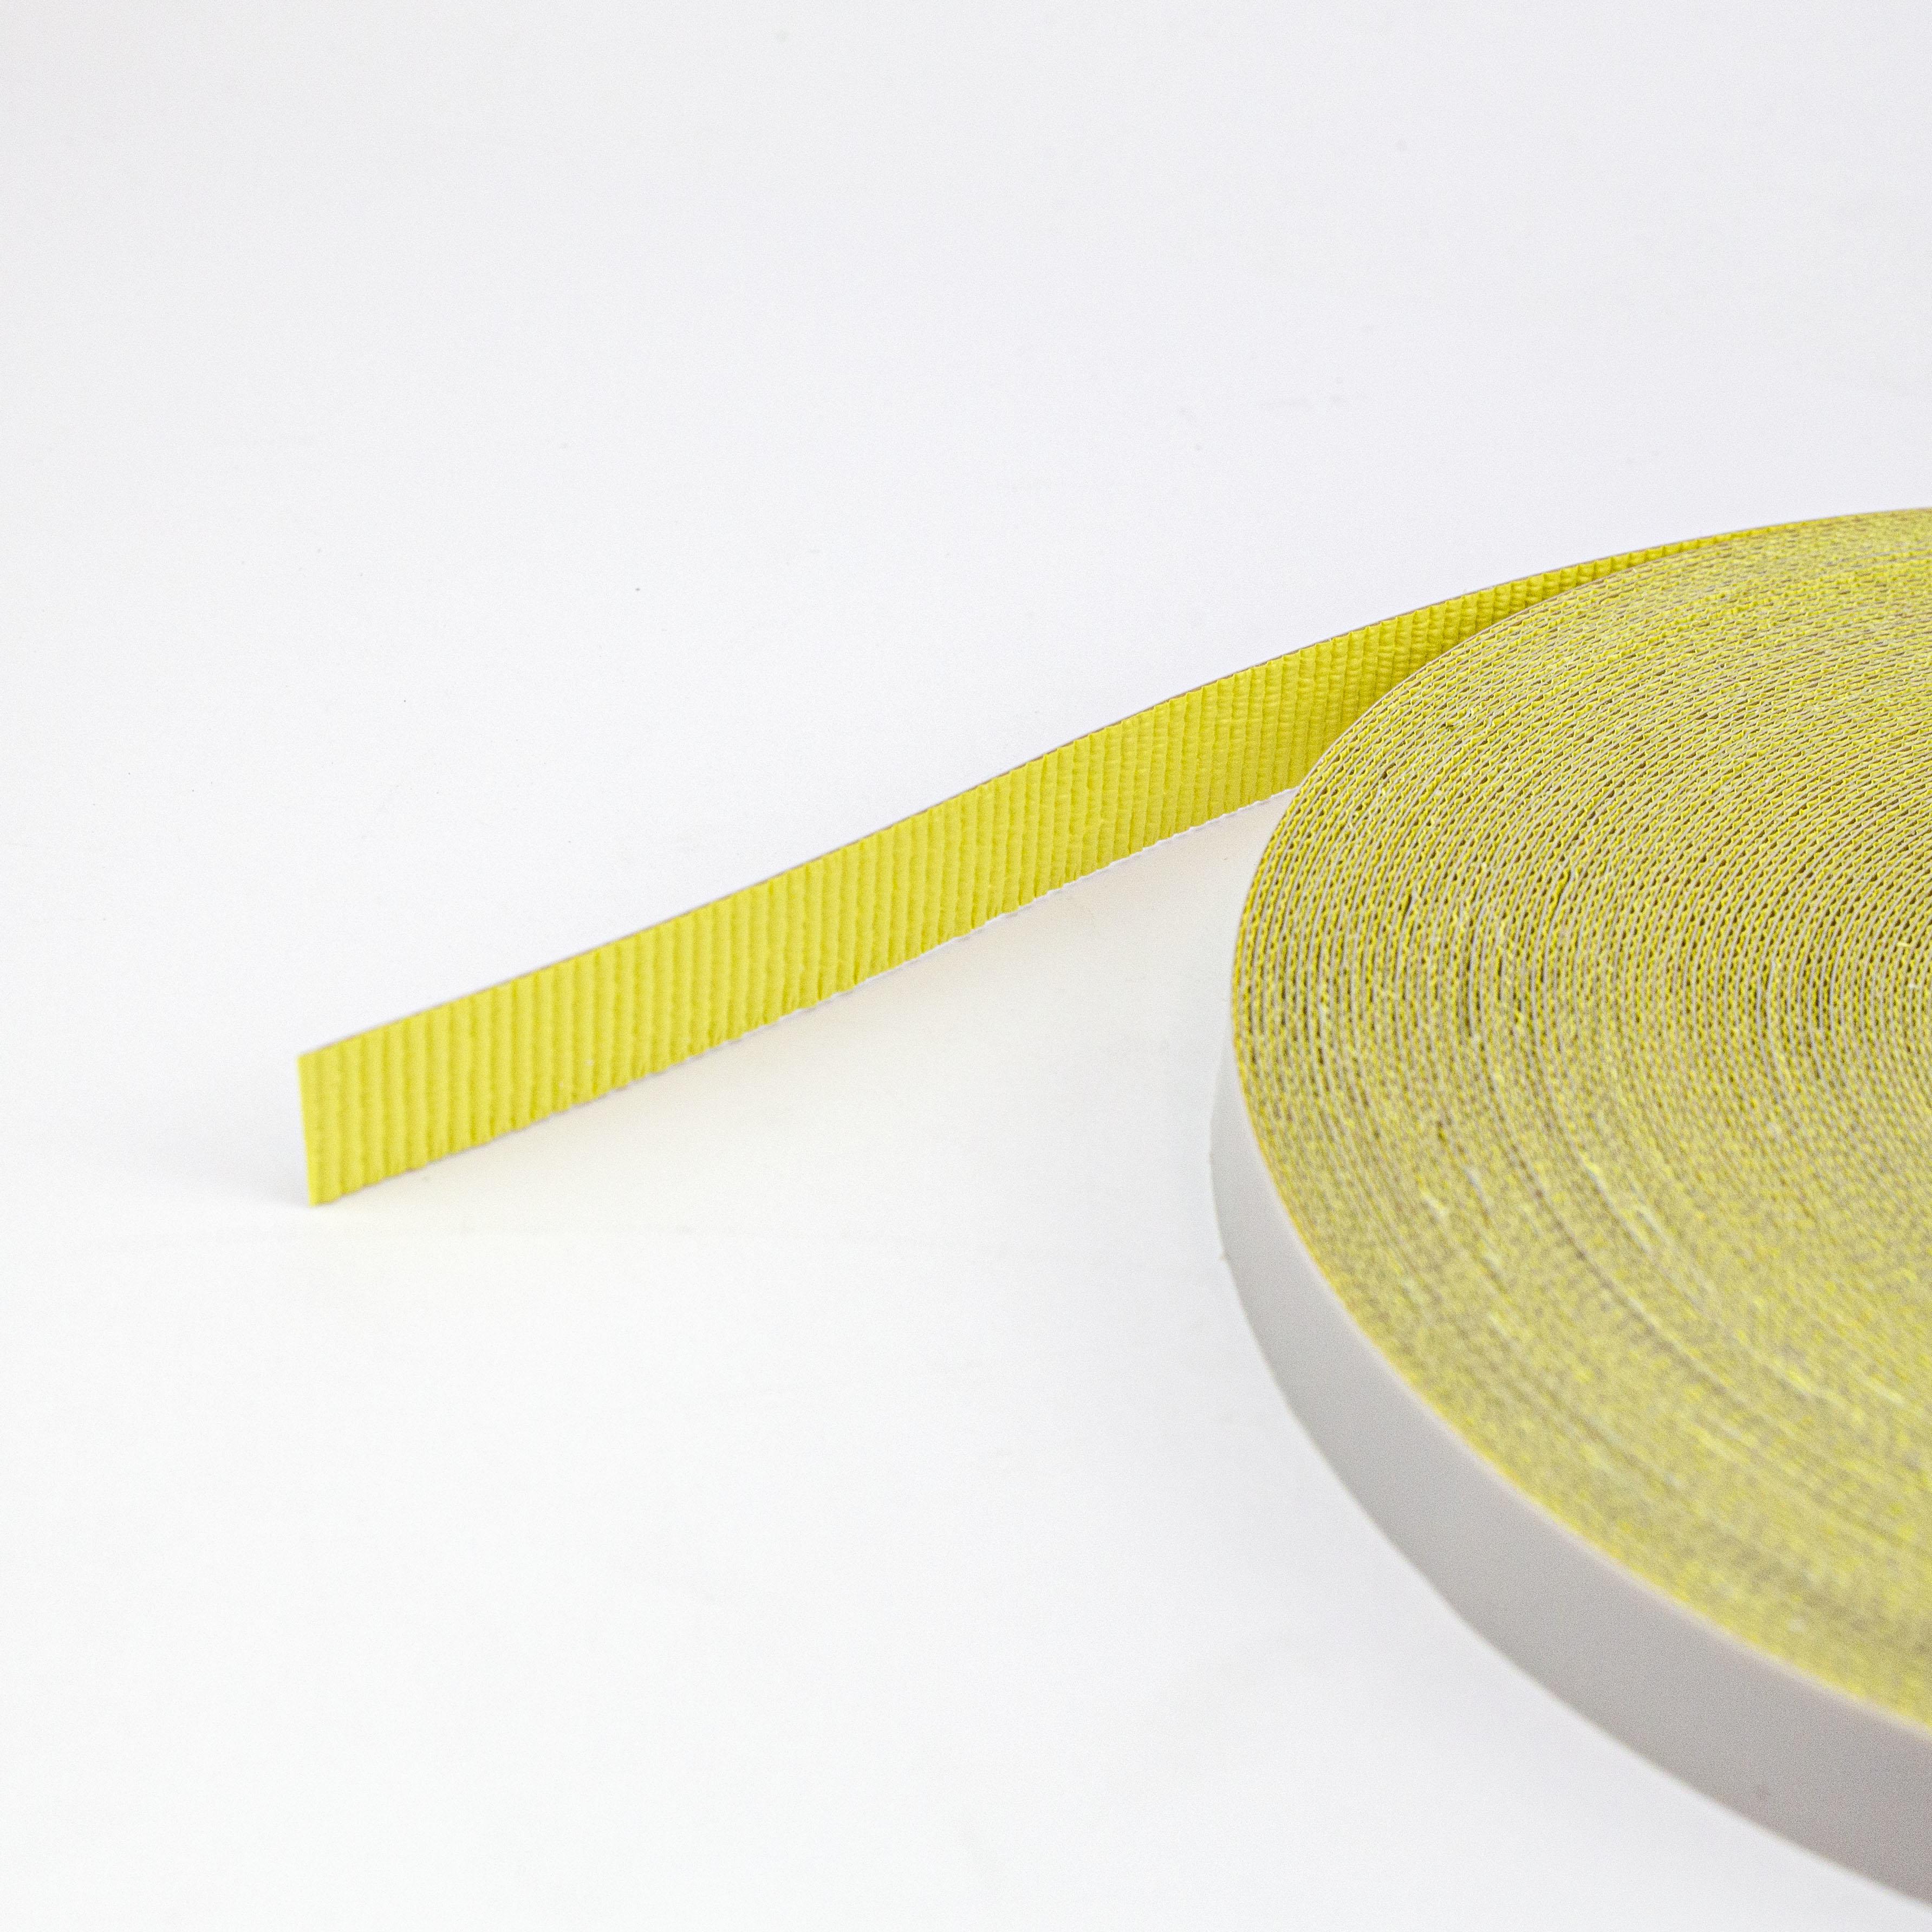 15mm 23202 PTFE Skived Tape with Liner x 30m roll